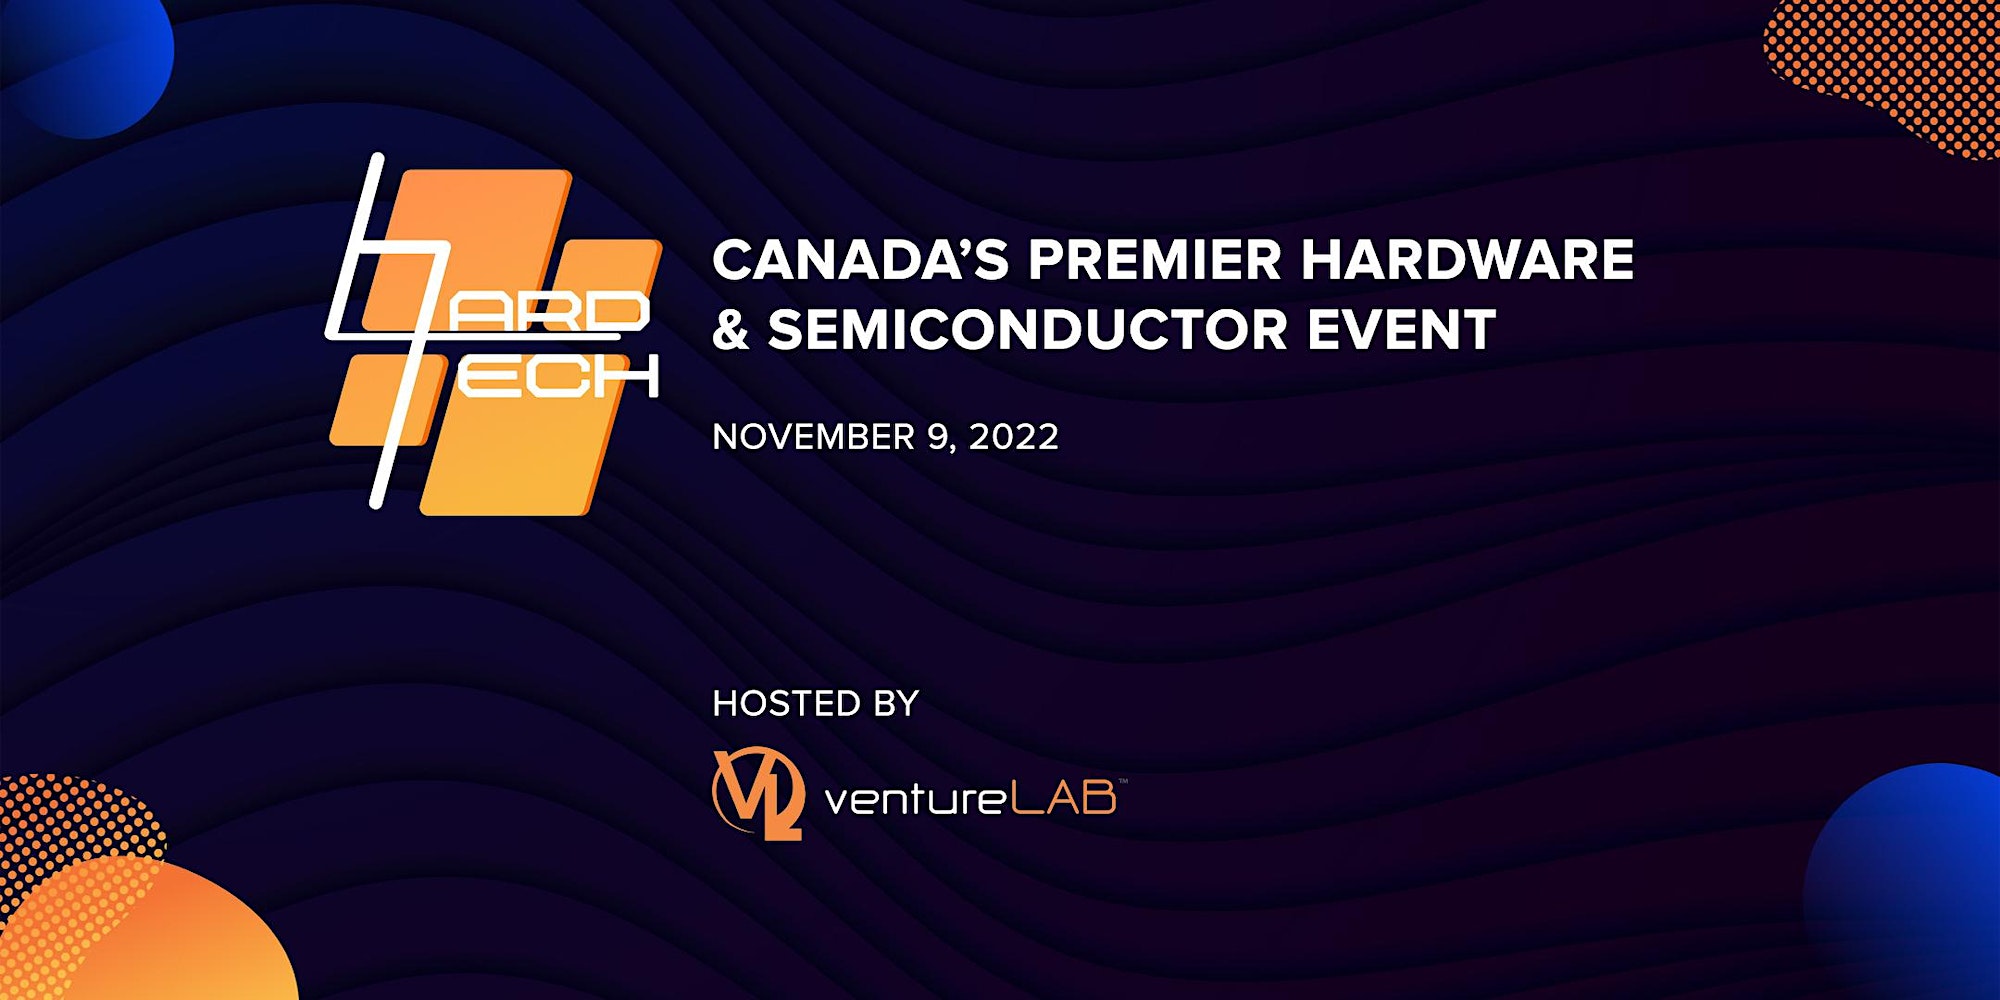 HARD TECH & Canada's premier hardware & semiconductor event. Hosted by ventureLAB. Nov. 9th, 2022.